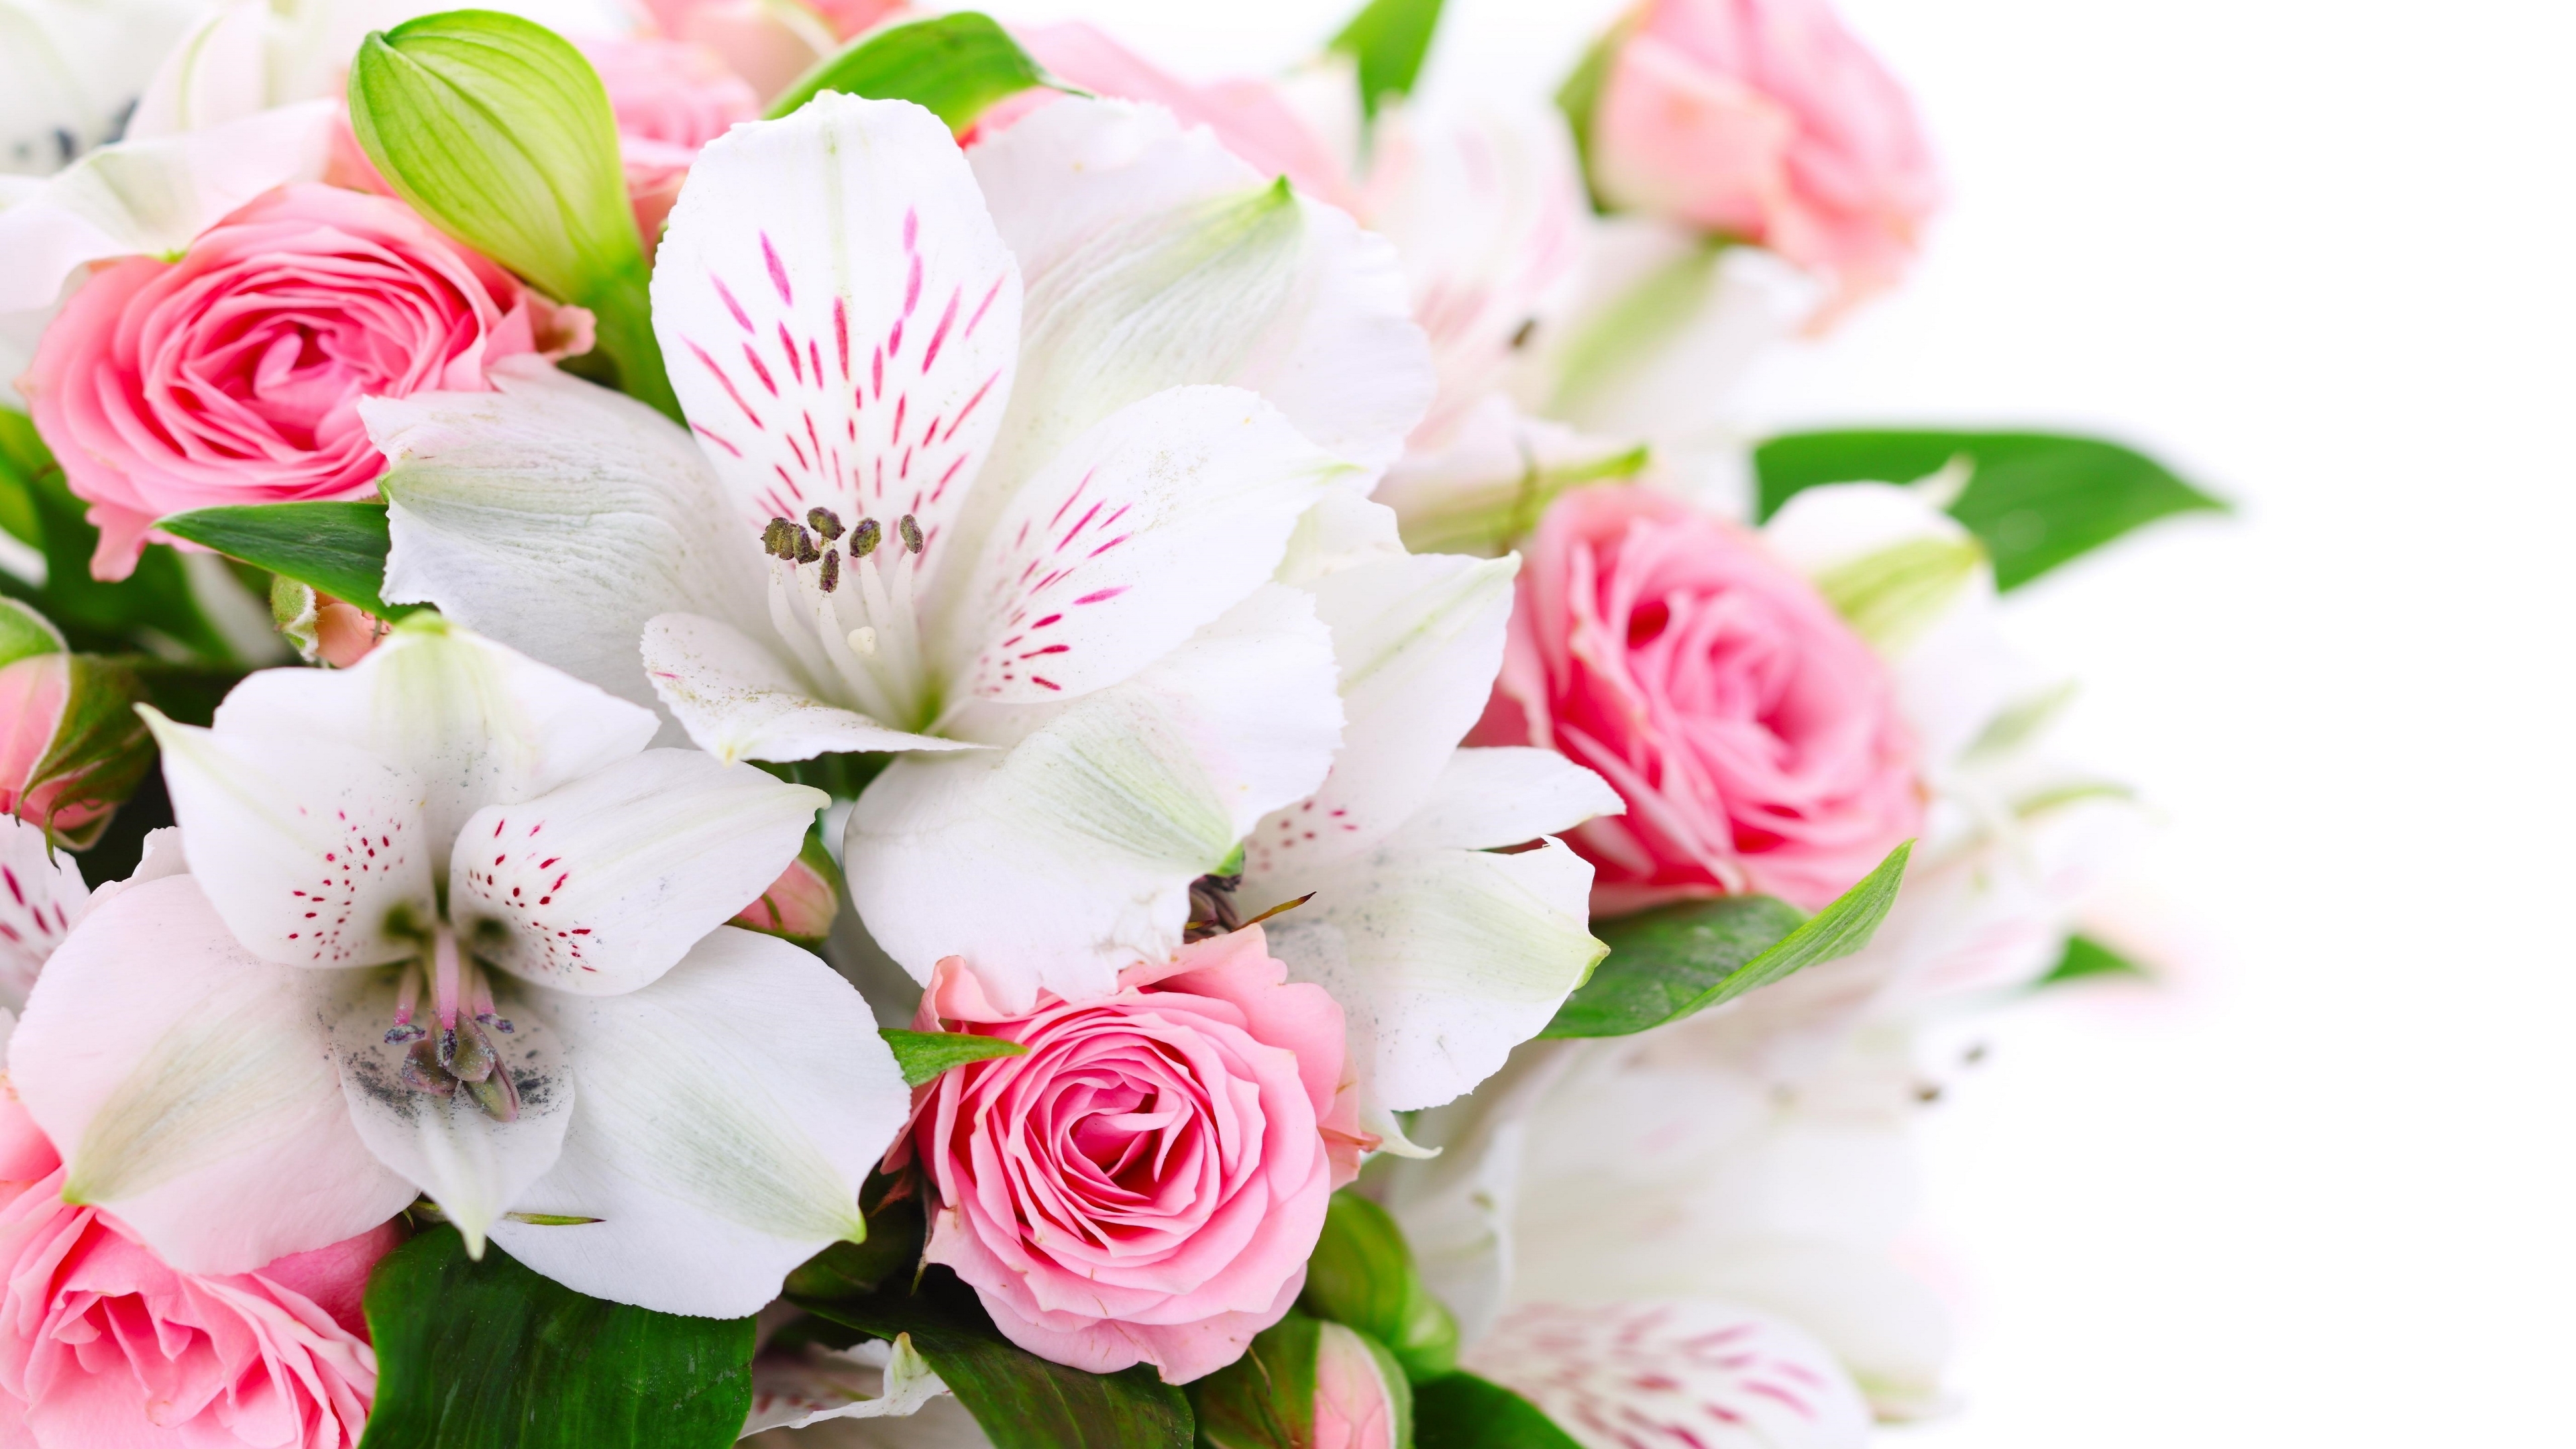 Pink Roses and White Lilies  for 3840 x 2160 4K Ultra HDTV resolution